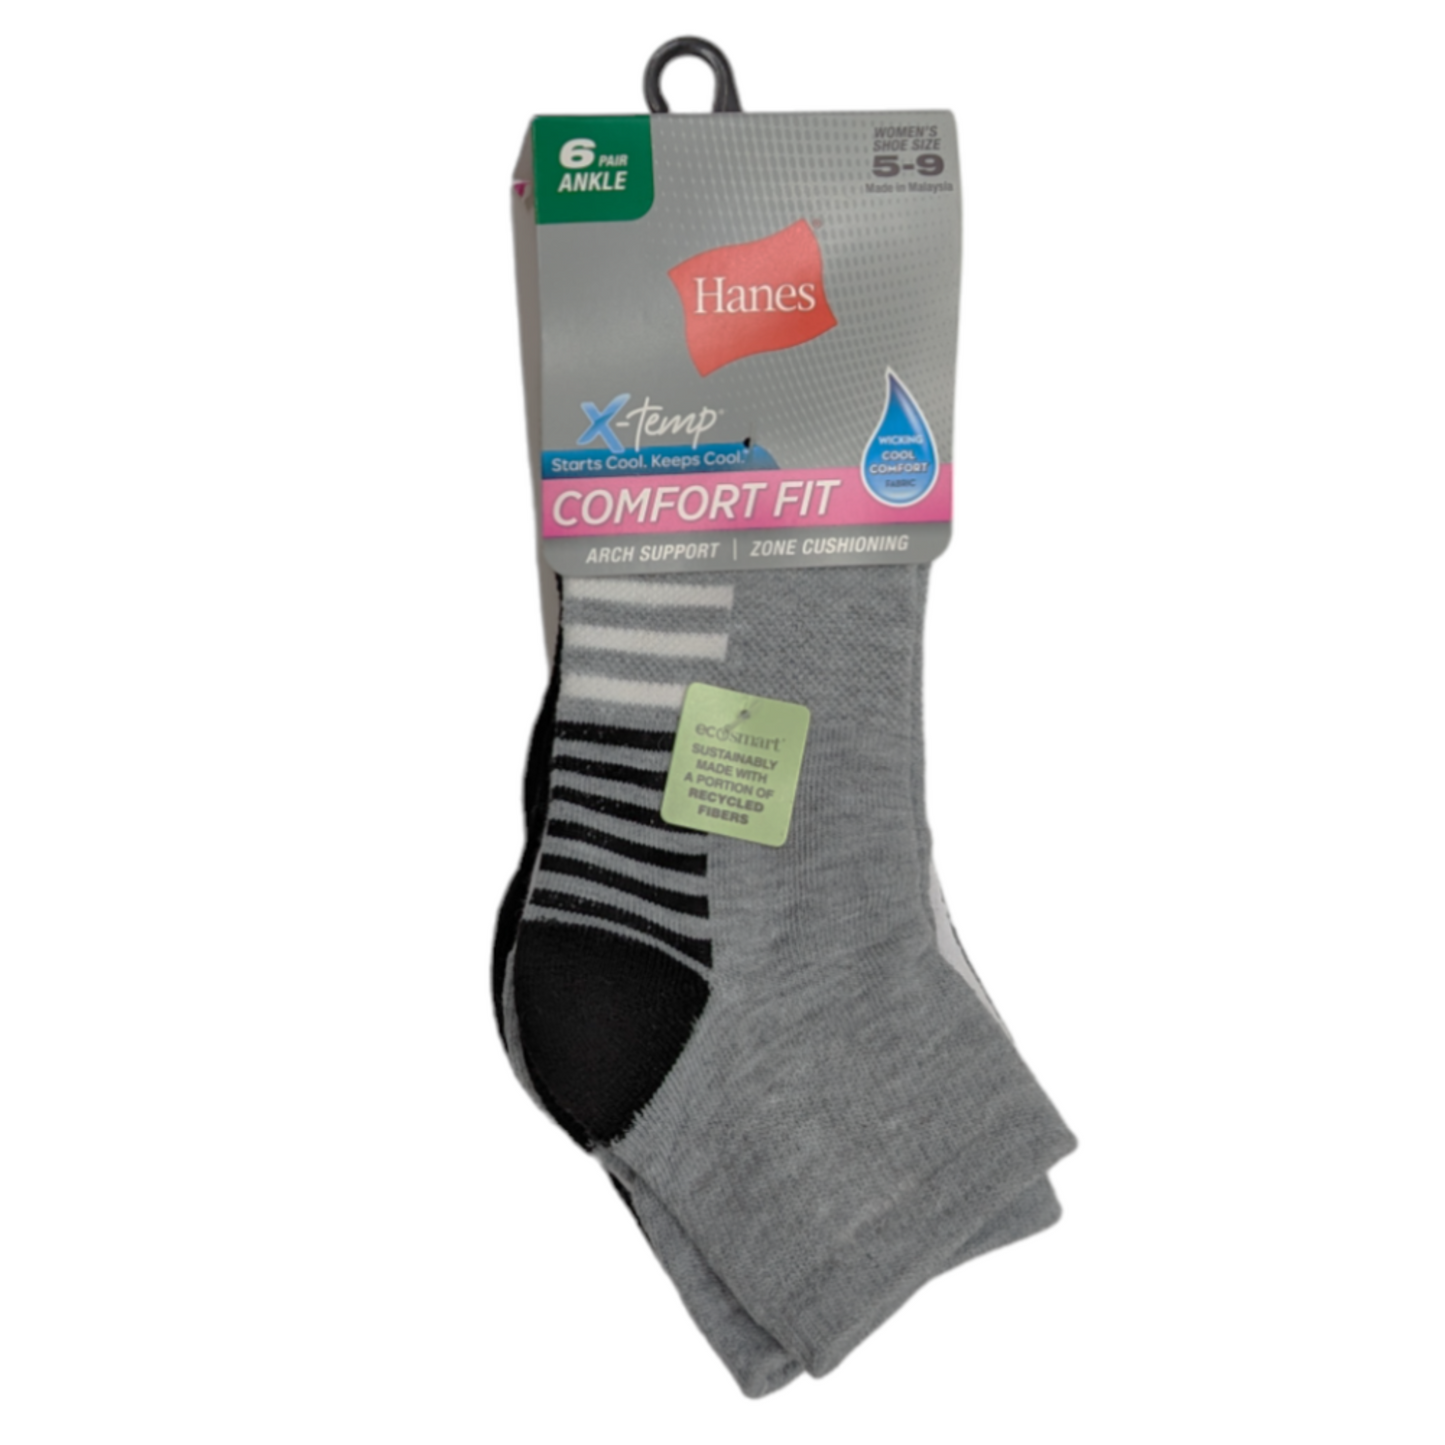 Hanes Women's Comfort Fit Ankle Socks 6-Pack Size 5-9